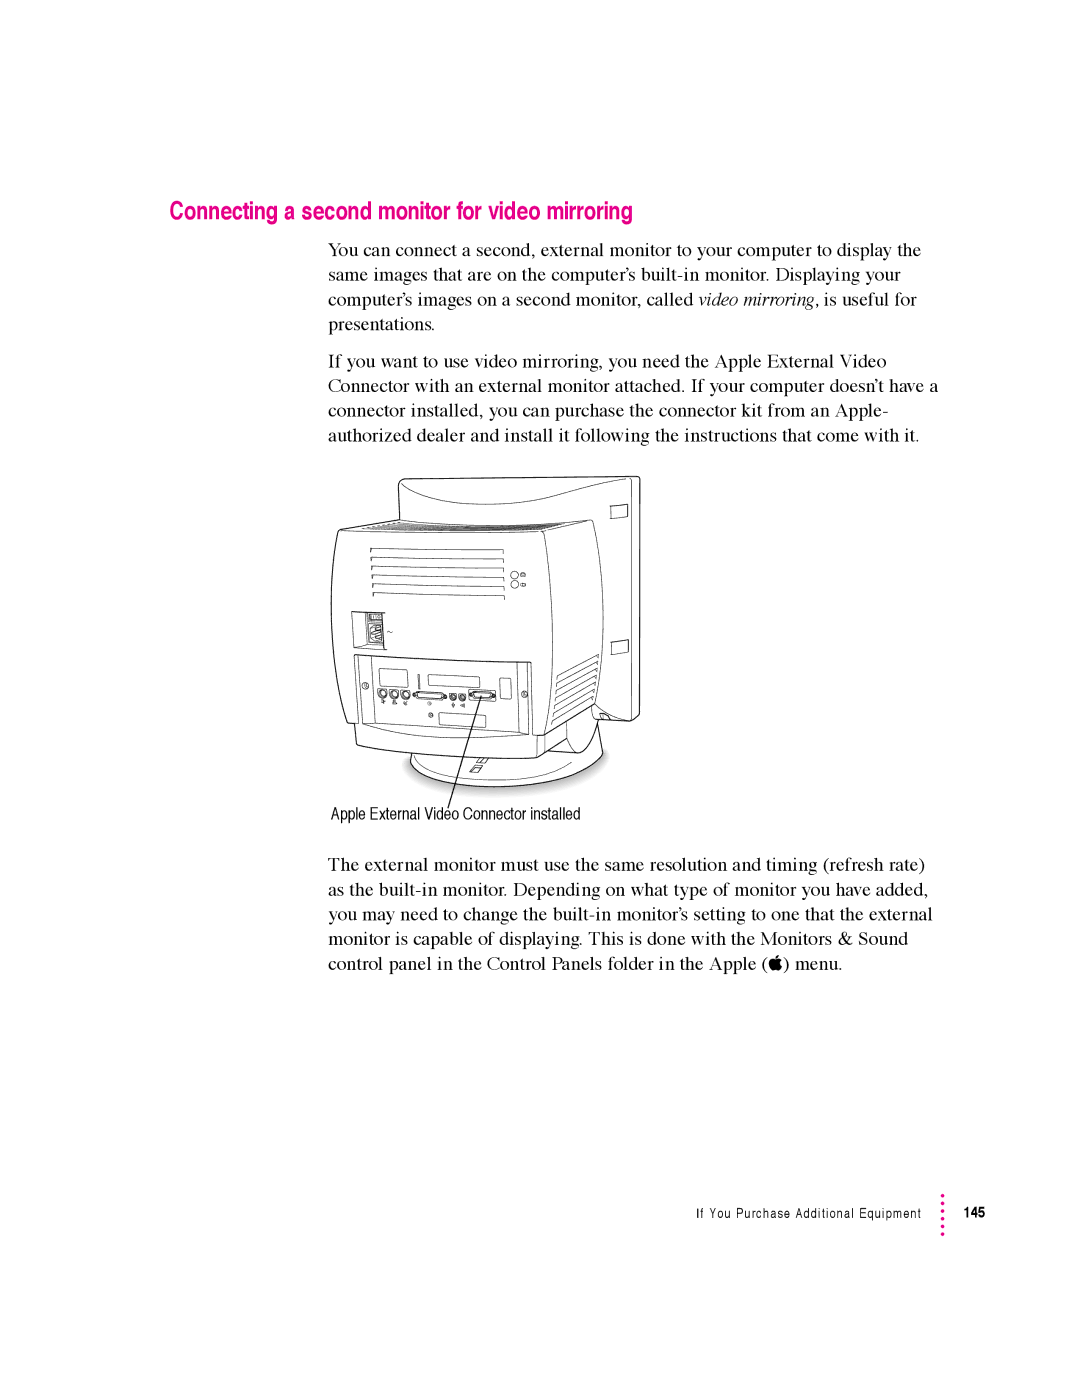 Apple 5400 Series manual Connecting a second monitor for video mirroring 